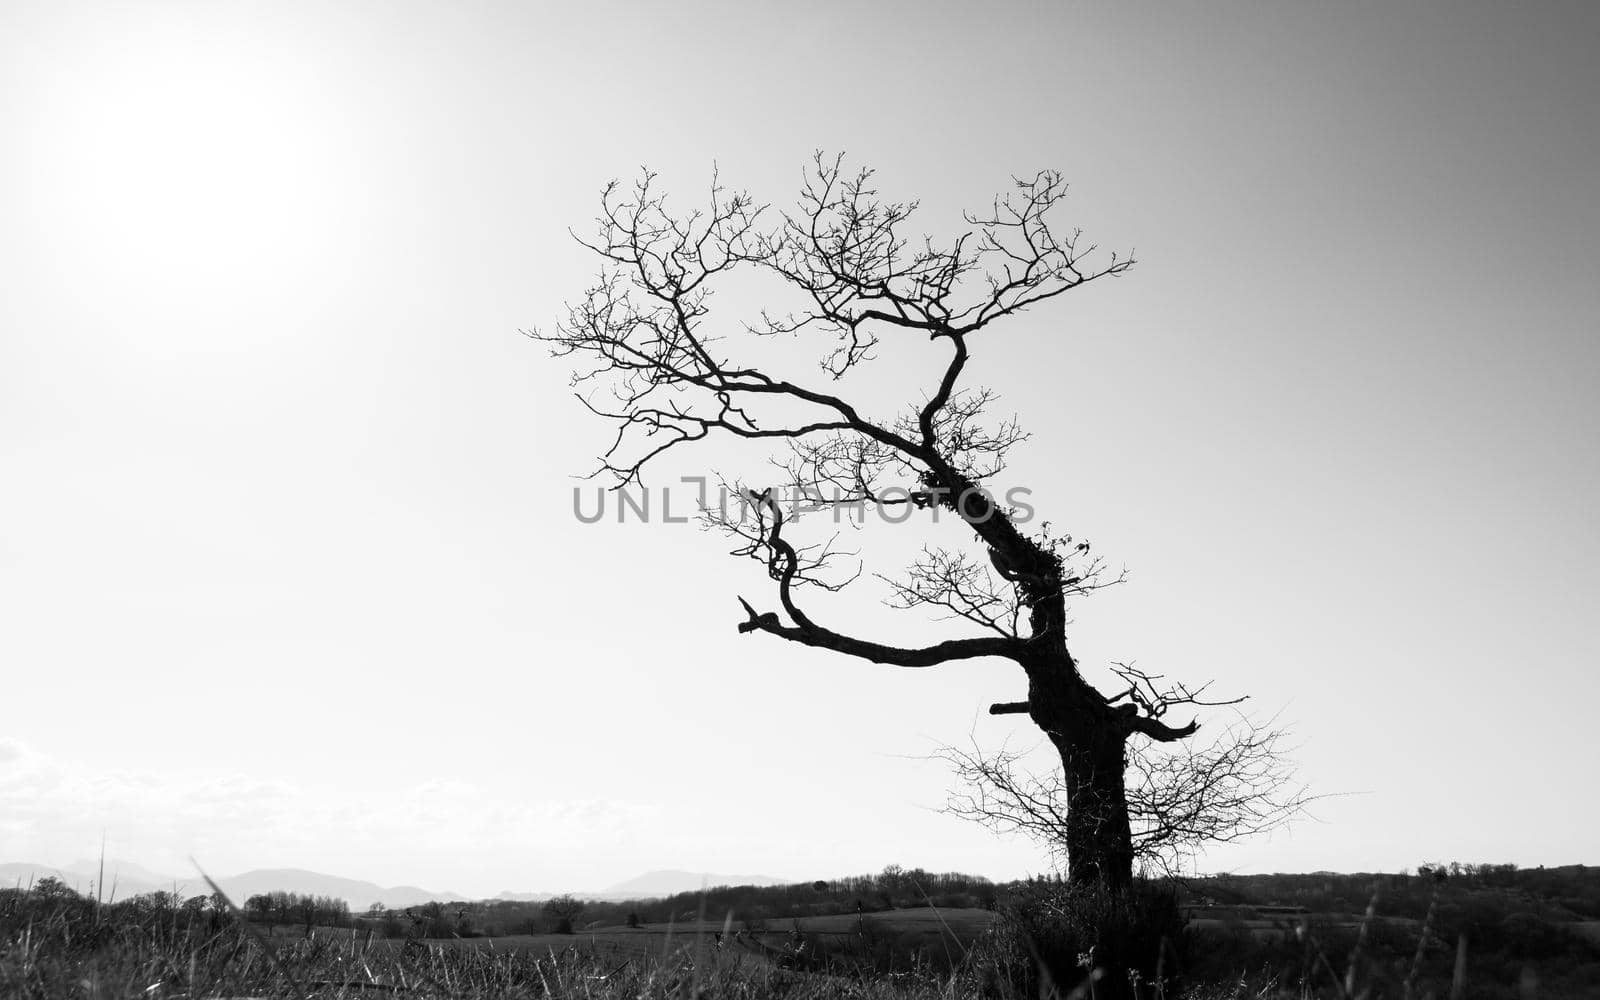 Silhouette of a single leafless gnarly tree in winter season, dark trunk and branches against sunny bright sky, black and white photography